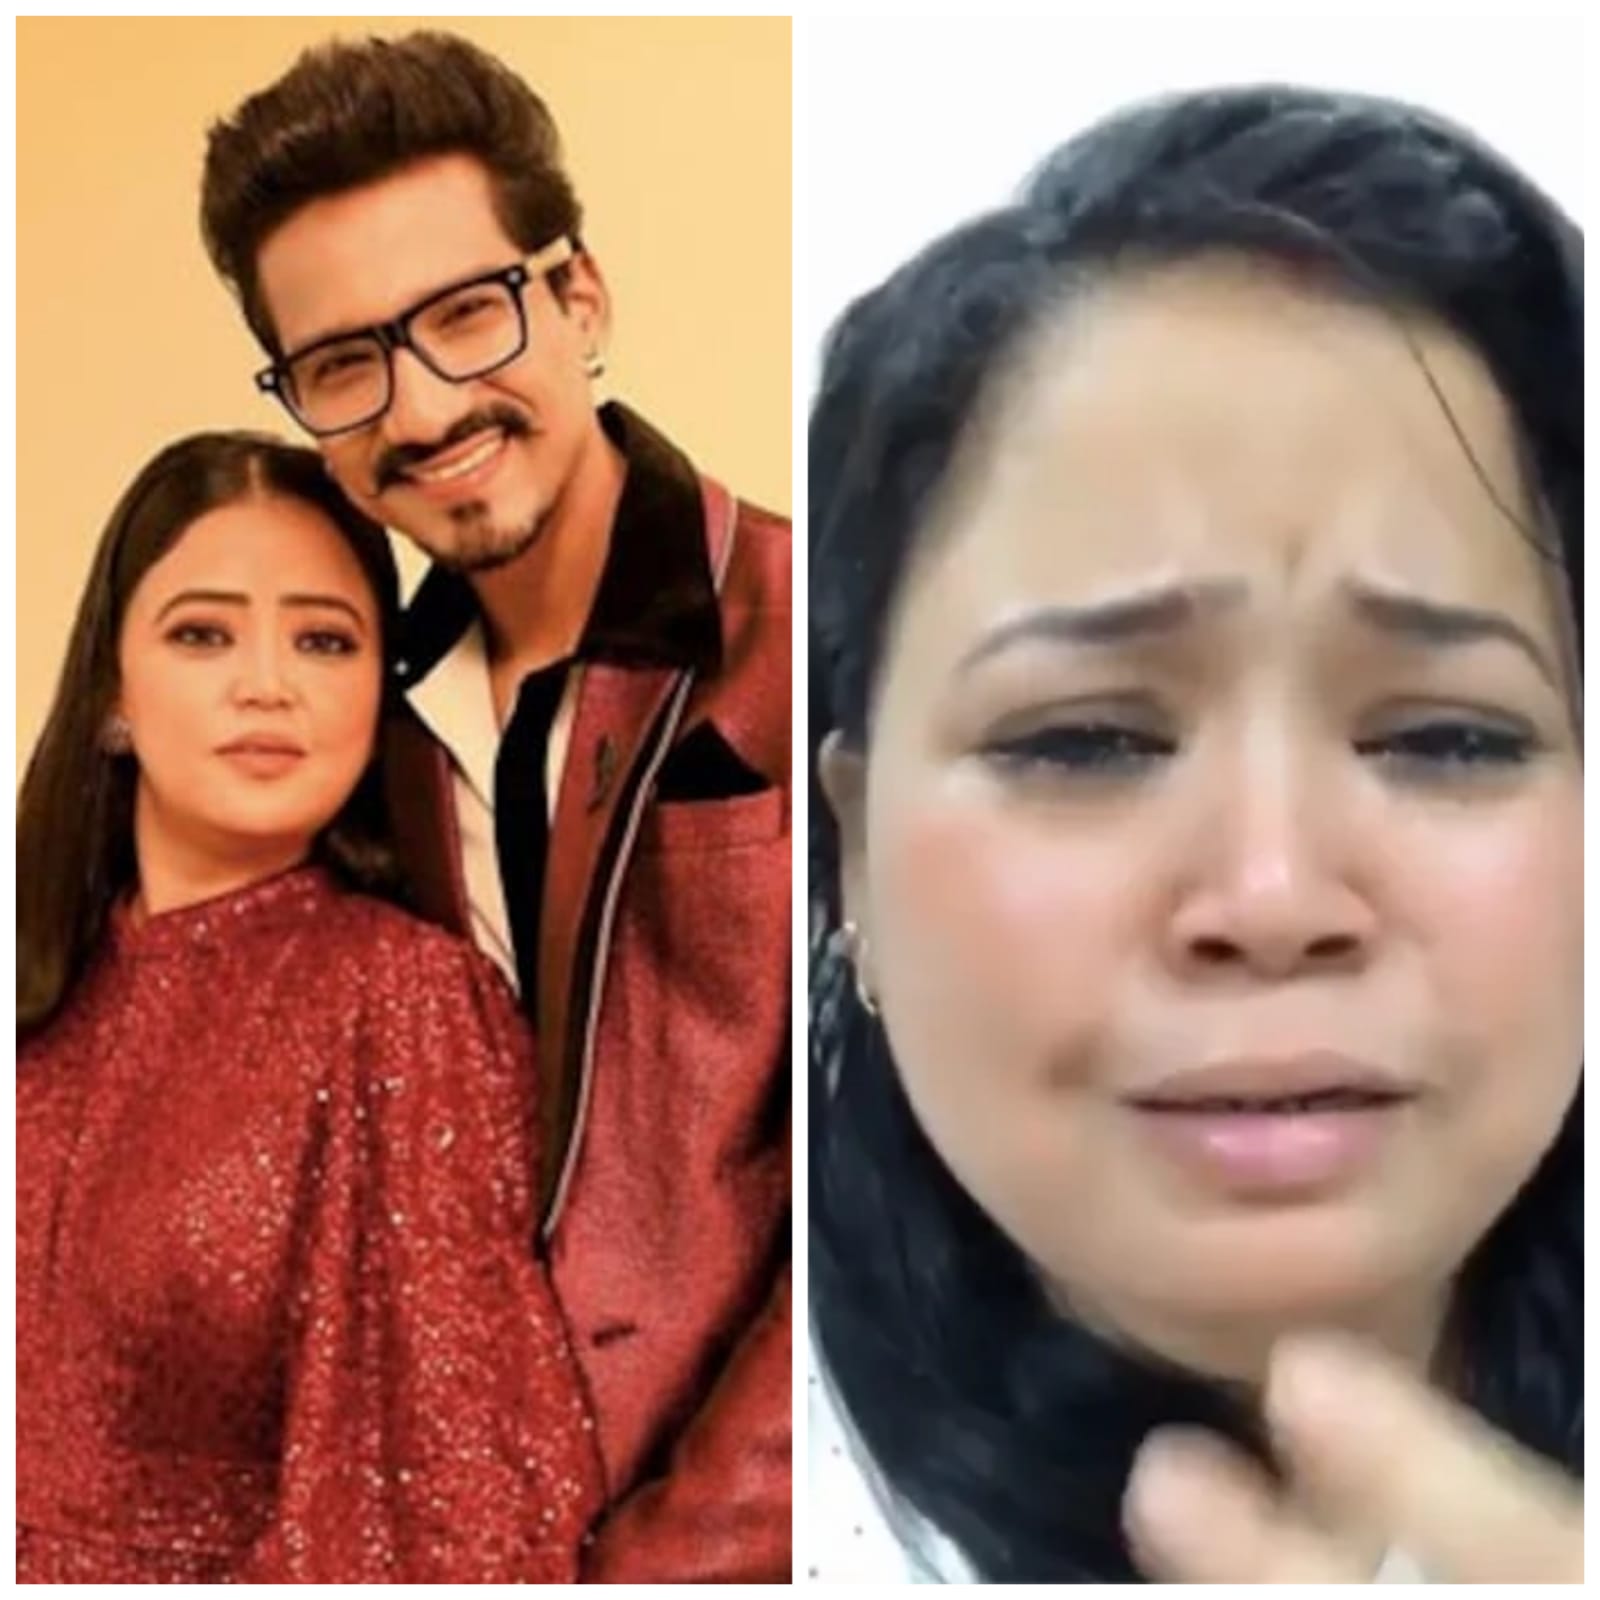 Haarsh Limbachiyaa Needs A Divorce Bharti Singh Narrated Her Ordeal By Sharing The Video Haarsh